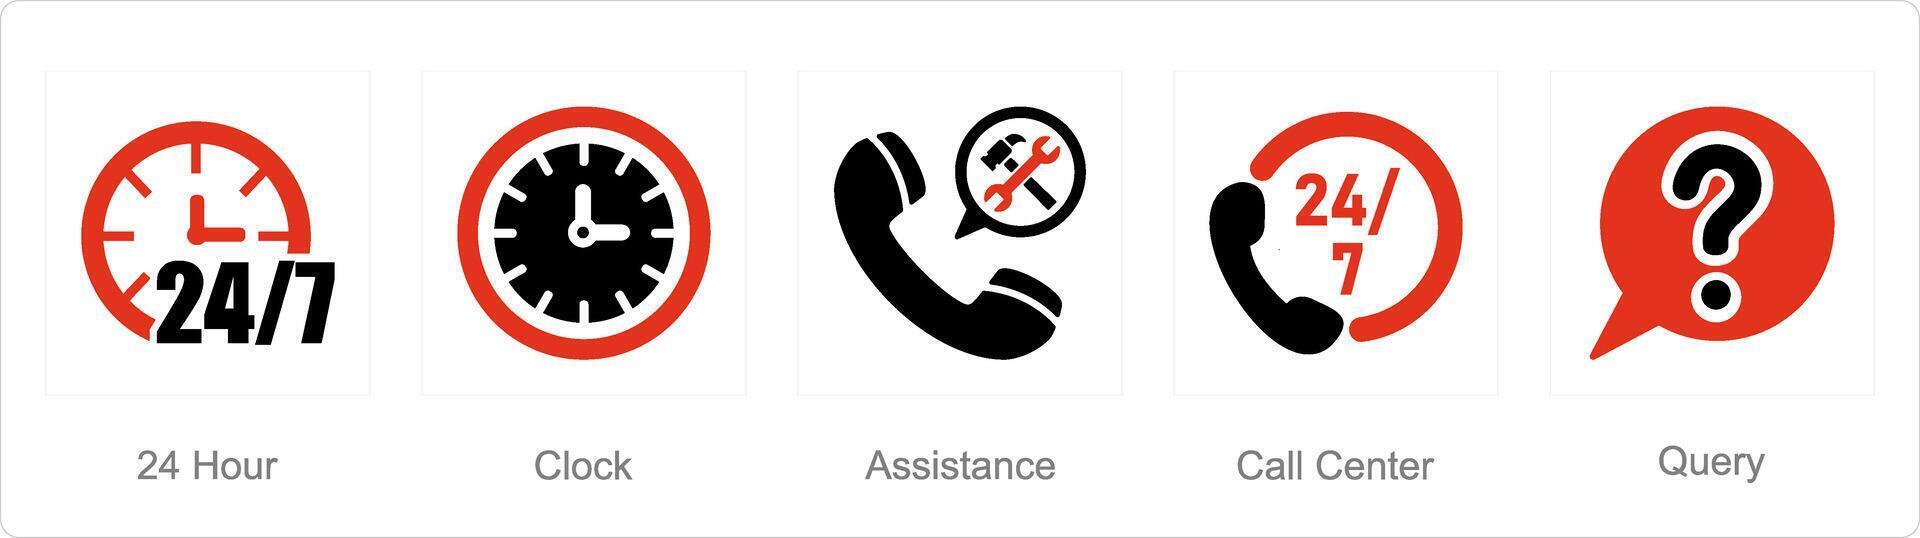 A set of 5 Contact icons as 24 hour, clock, assistance vector